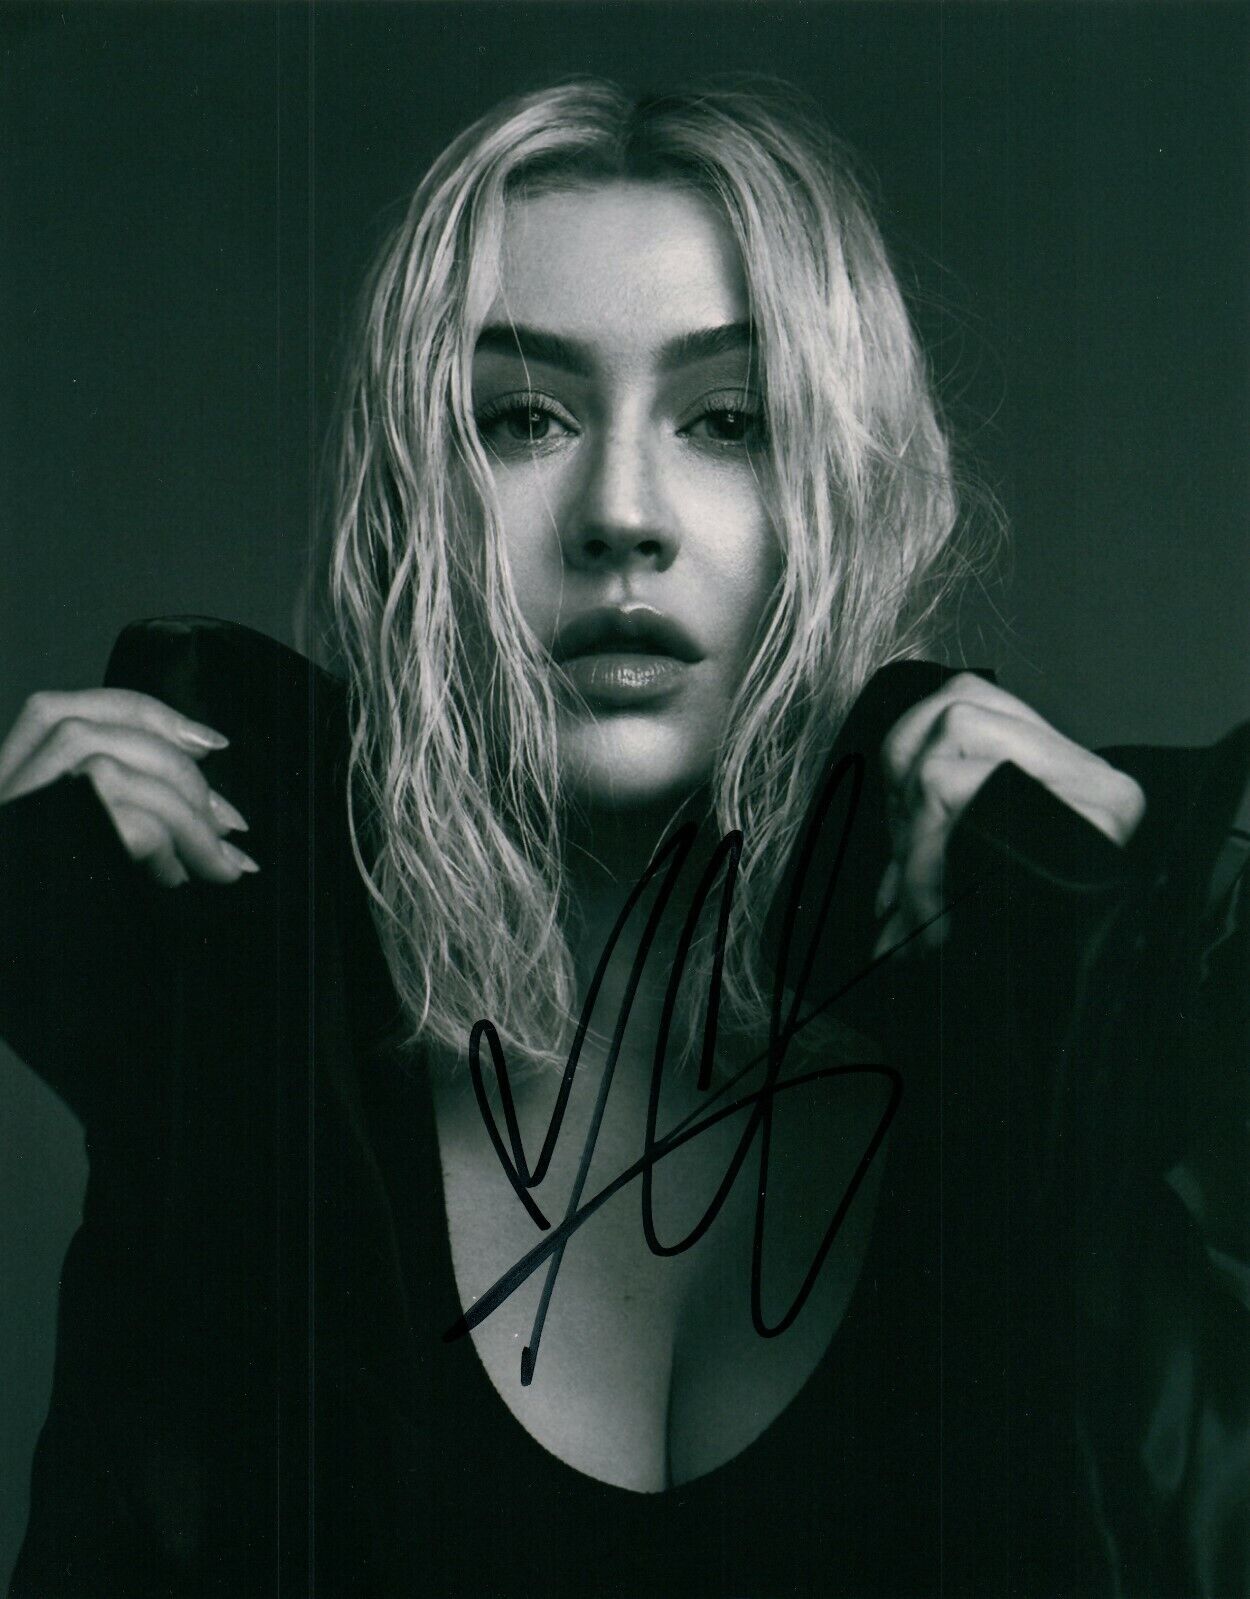 Christina Aguilera Super Sexy Singer Hand Signed 8x10 Photo Poster painting Autographed COA 3